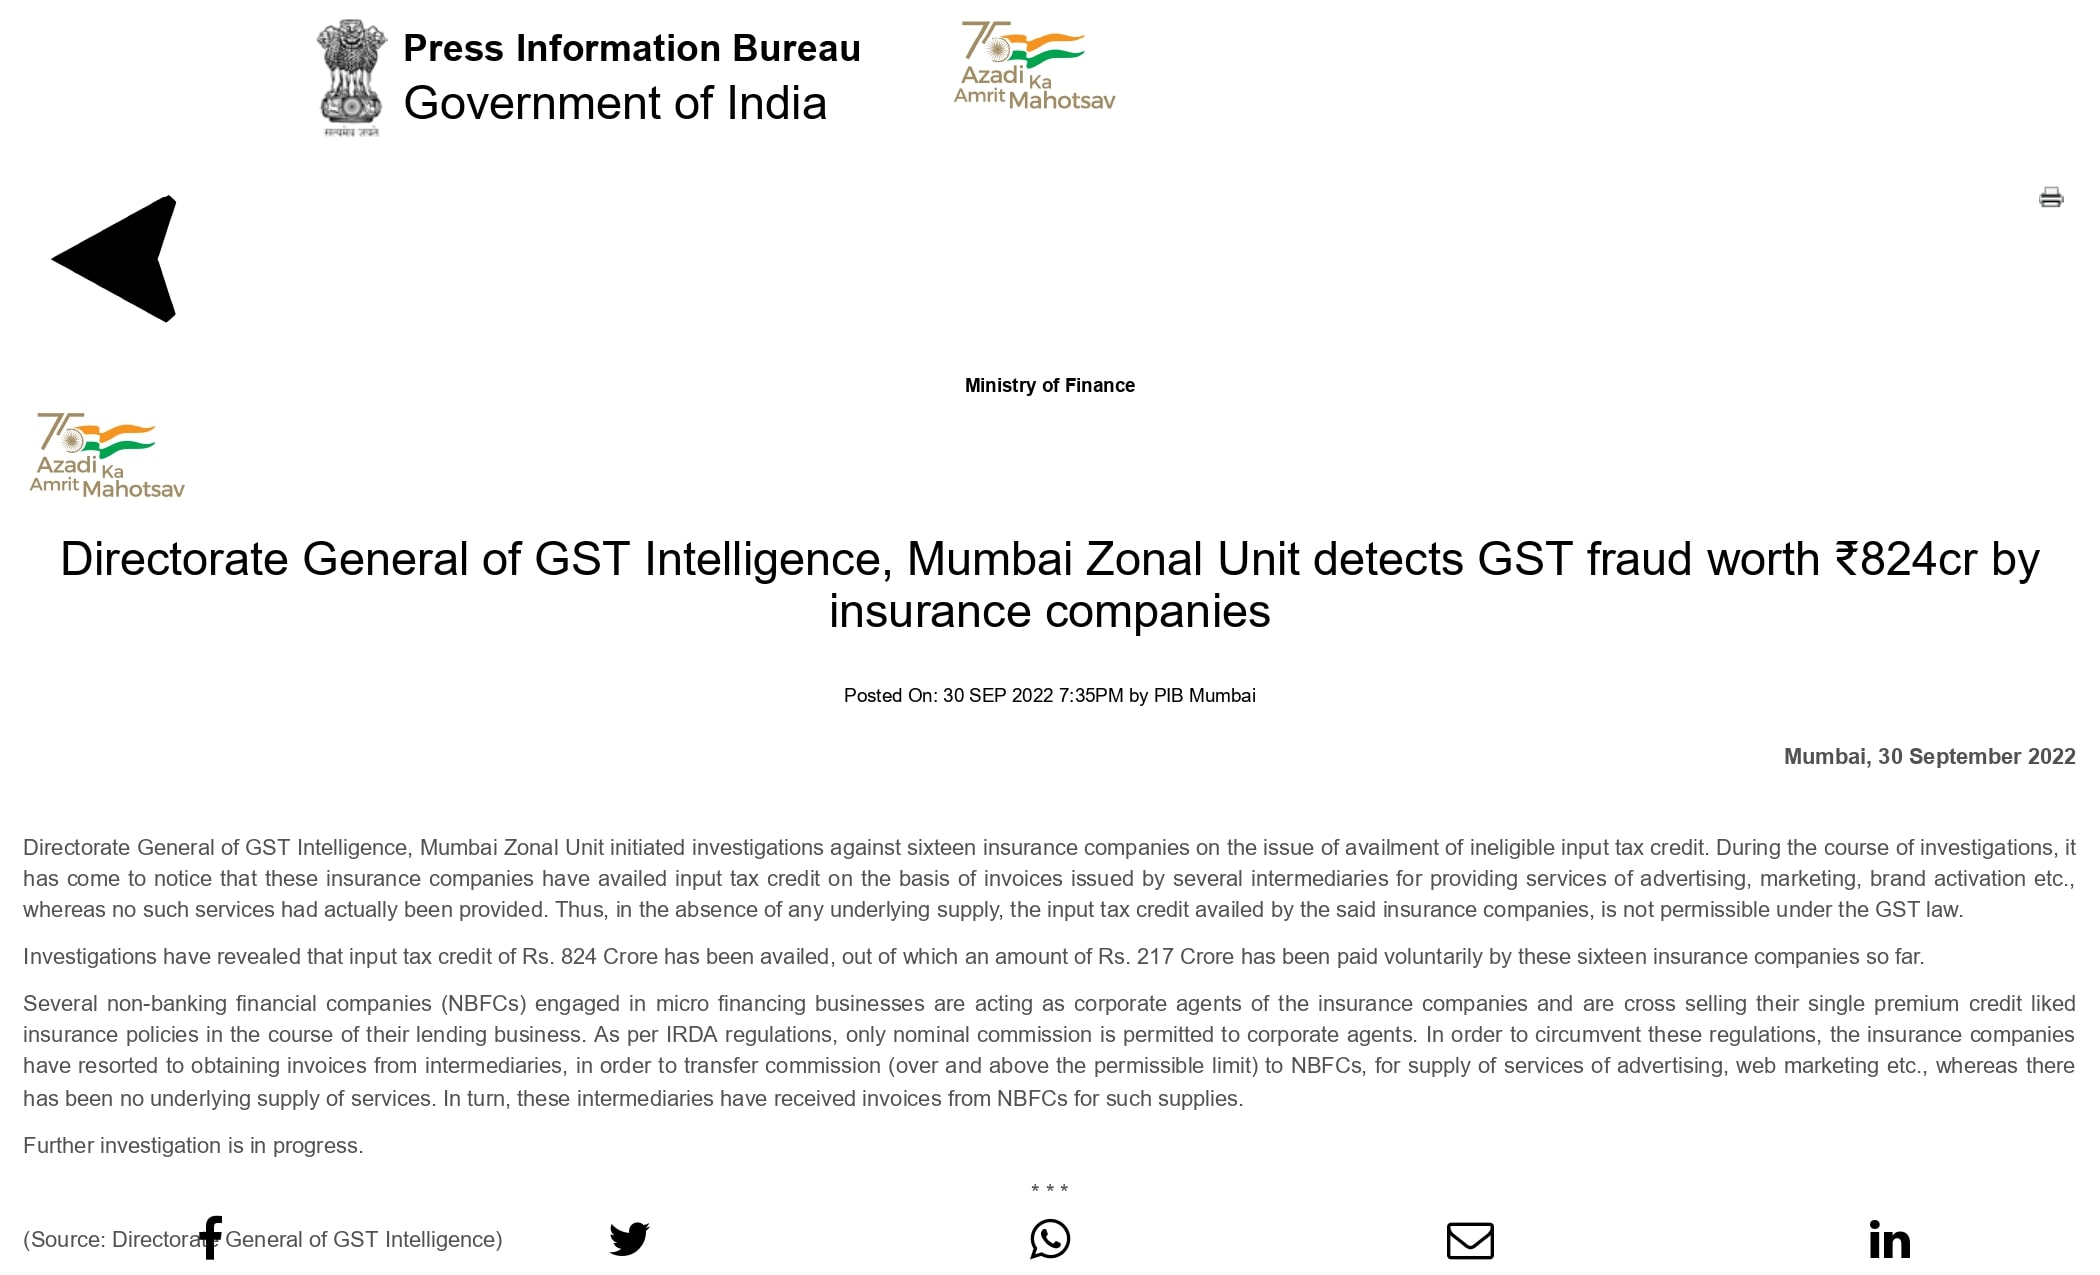 Directorate General of GST Intelligence, Mumbai Zonal Unit detects GST fraud worth ₹824cr by insurance companies